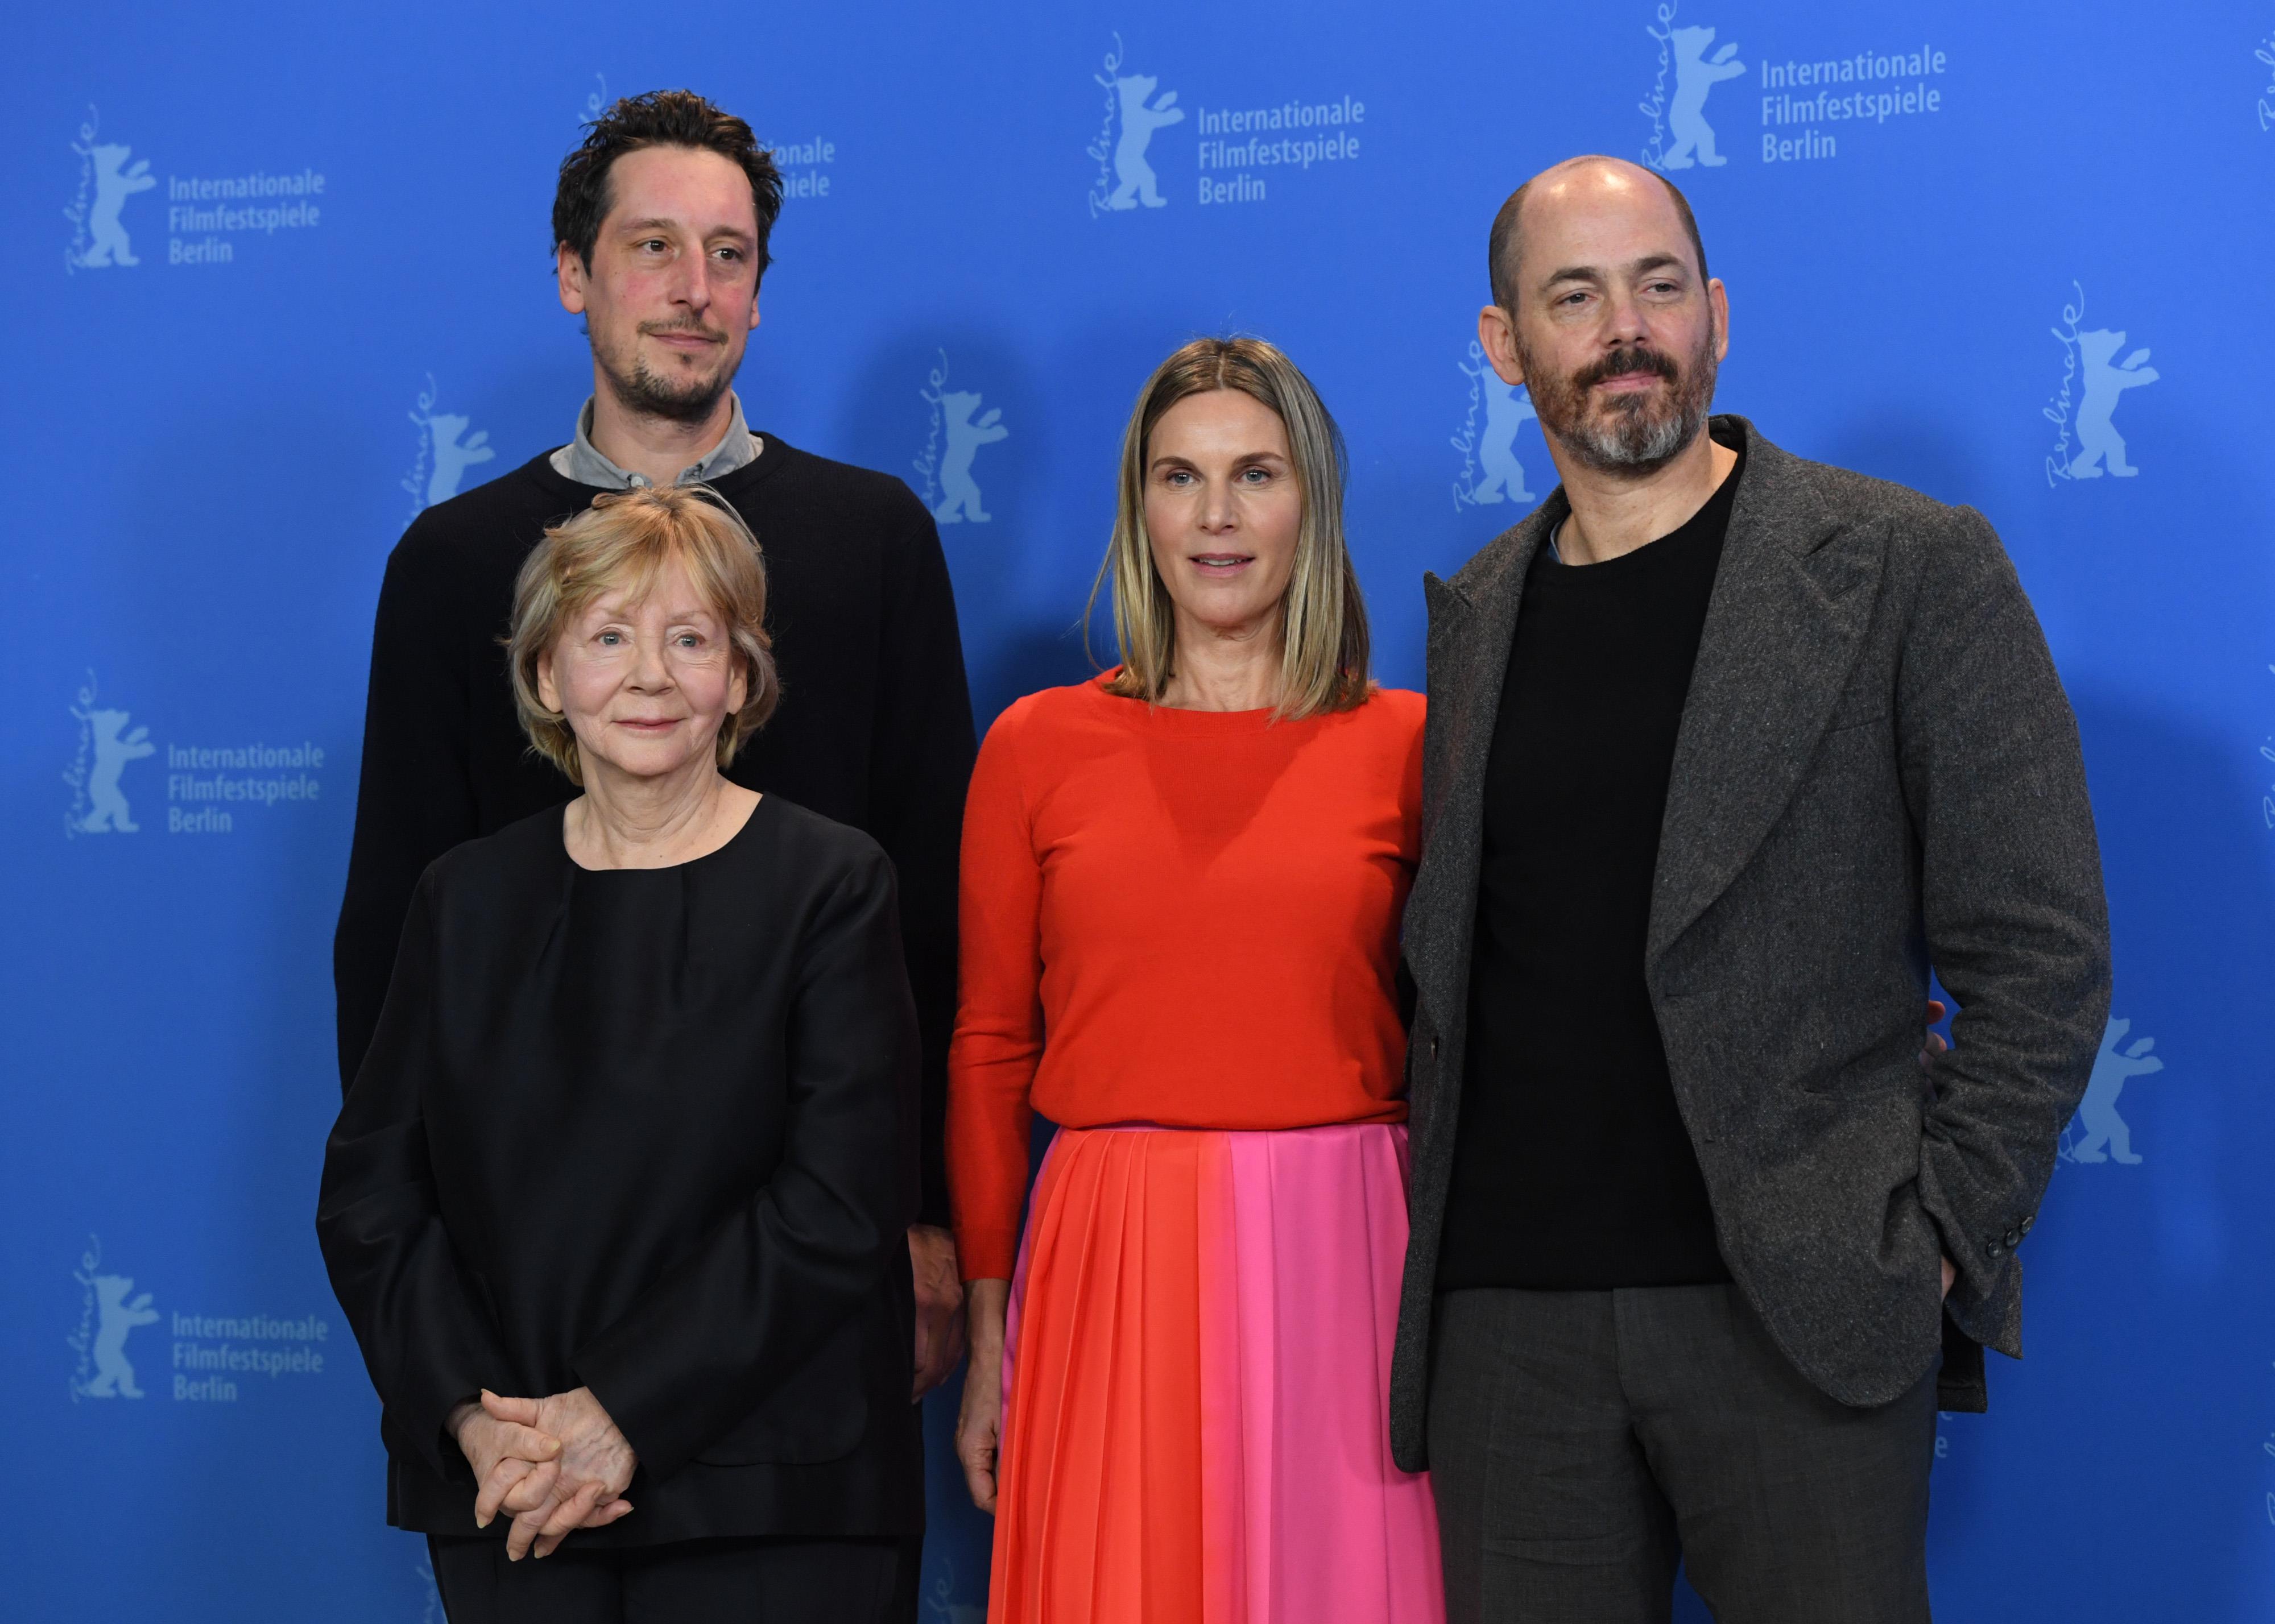 Director and screenwriter Edward Berger and actors Nele Mueller-Stoefen, Christine Schorn and Hans Loew pose during a photocall to promote the movie All My Loving at the 69th Berlinale International Film Festival in Berlin, Germany, February 9, 2019. REUTERS